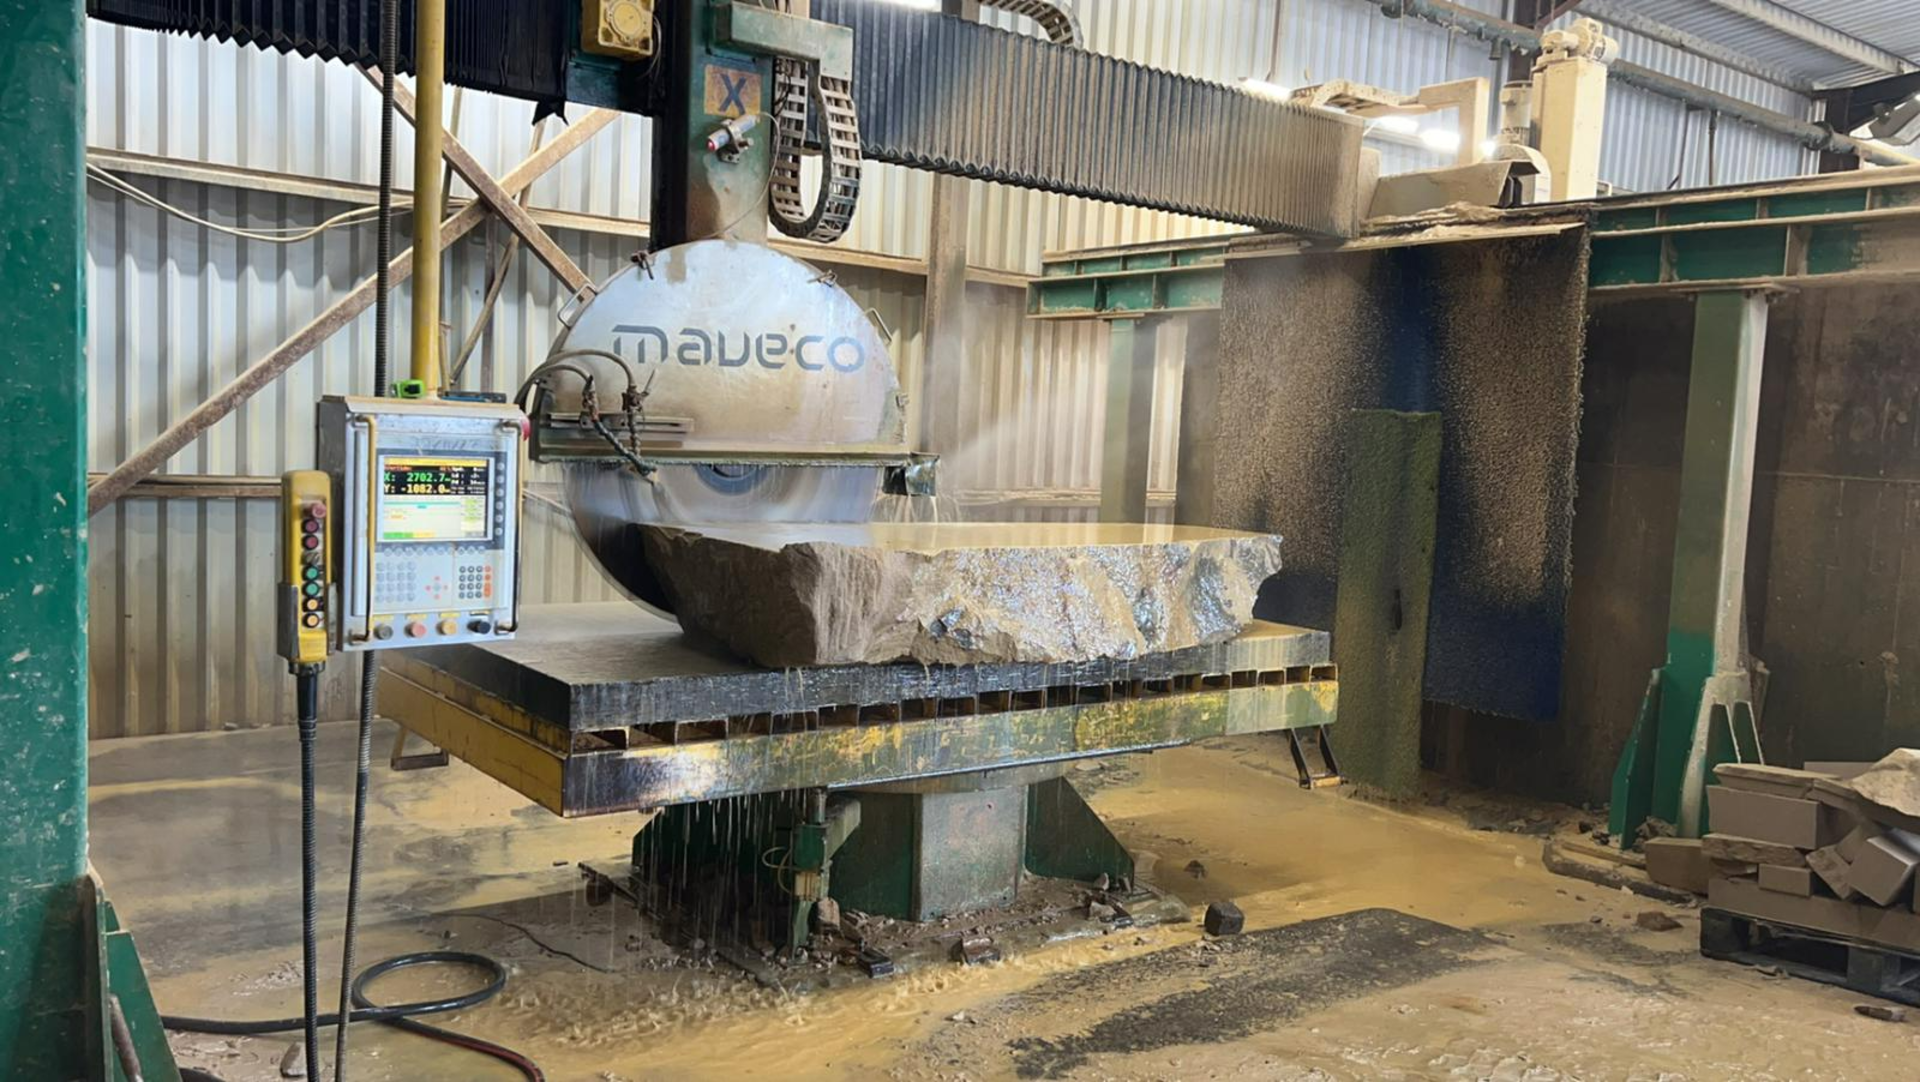 Maveco 1200 automatic Stone Saw Still in use every day Good condition  cuts like new well serviced - Bild 3 aus 6